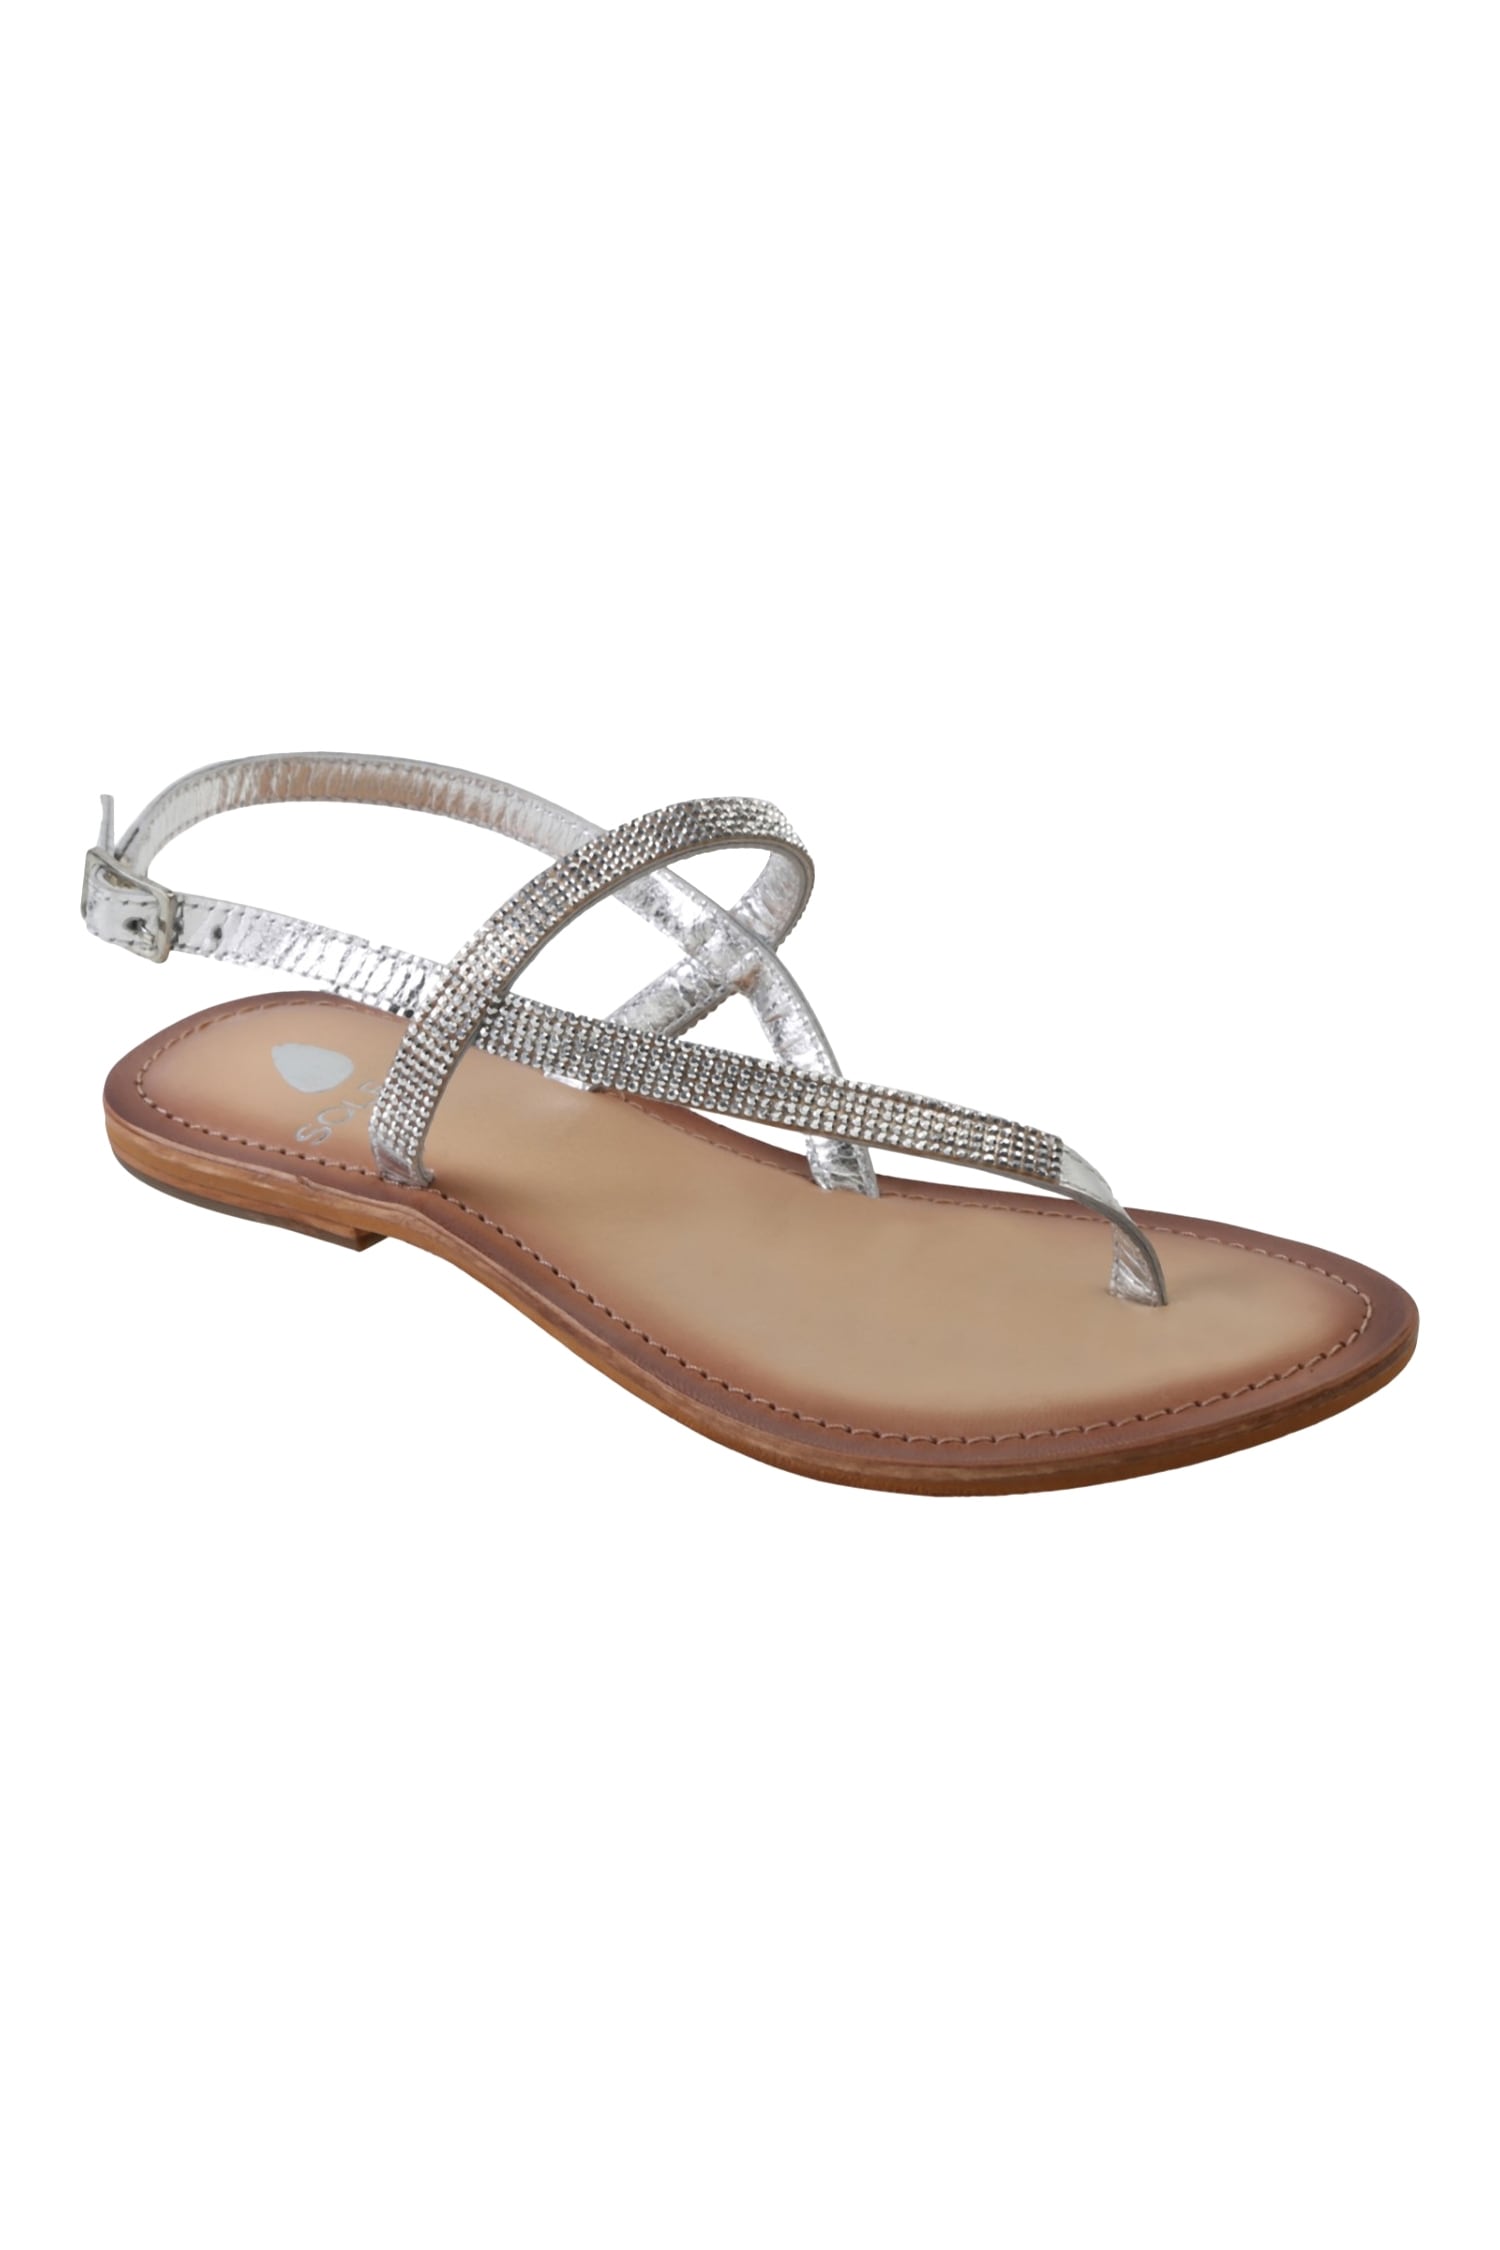 Shop for Sandals | Holiday Fashion | Footwear | Womens | online at  Swimwear365